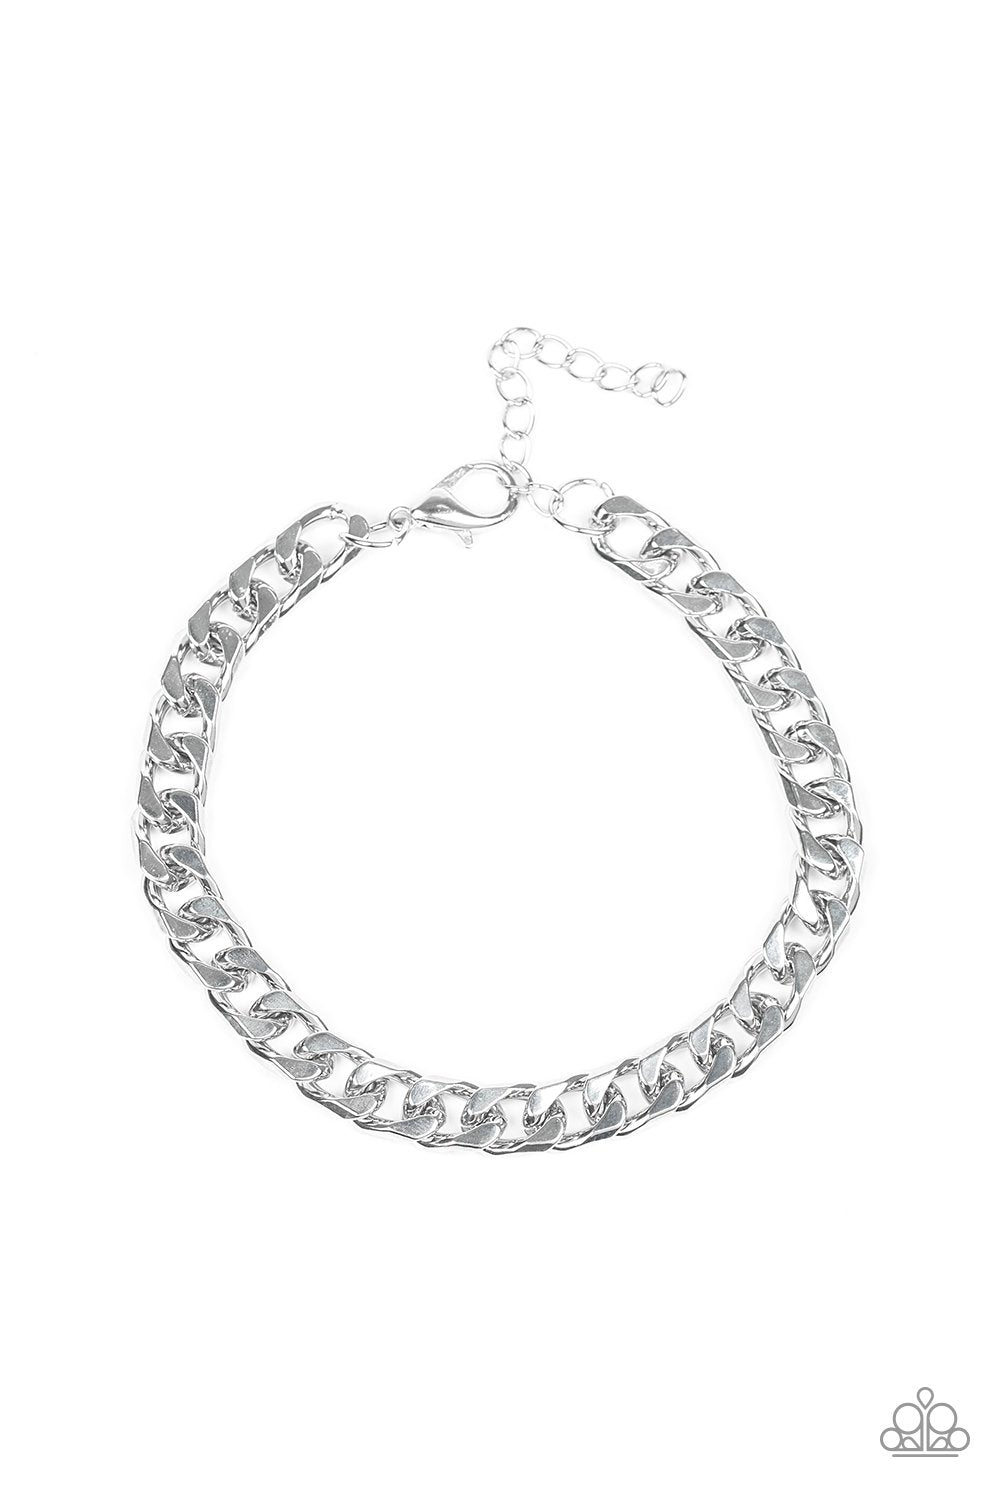 Paparazzi Accessories - Take It To The Bank Silver Bracelet